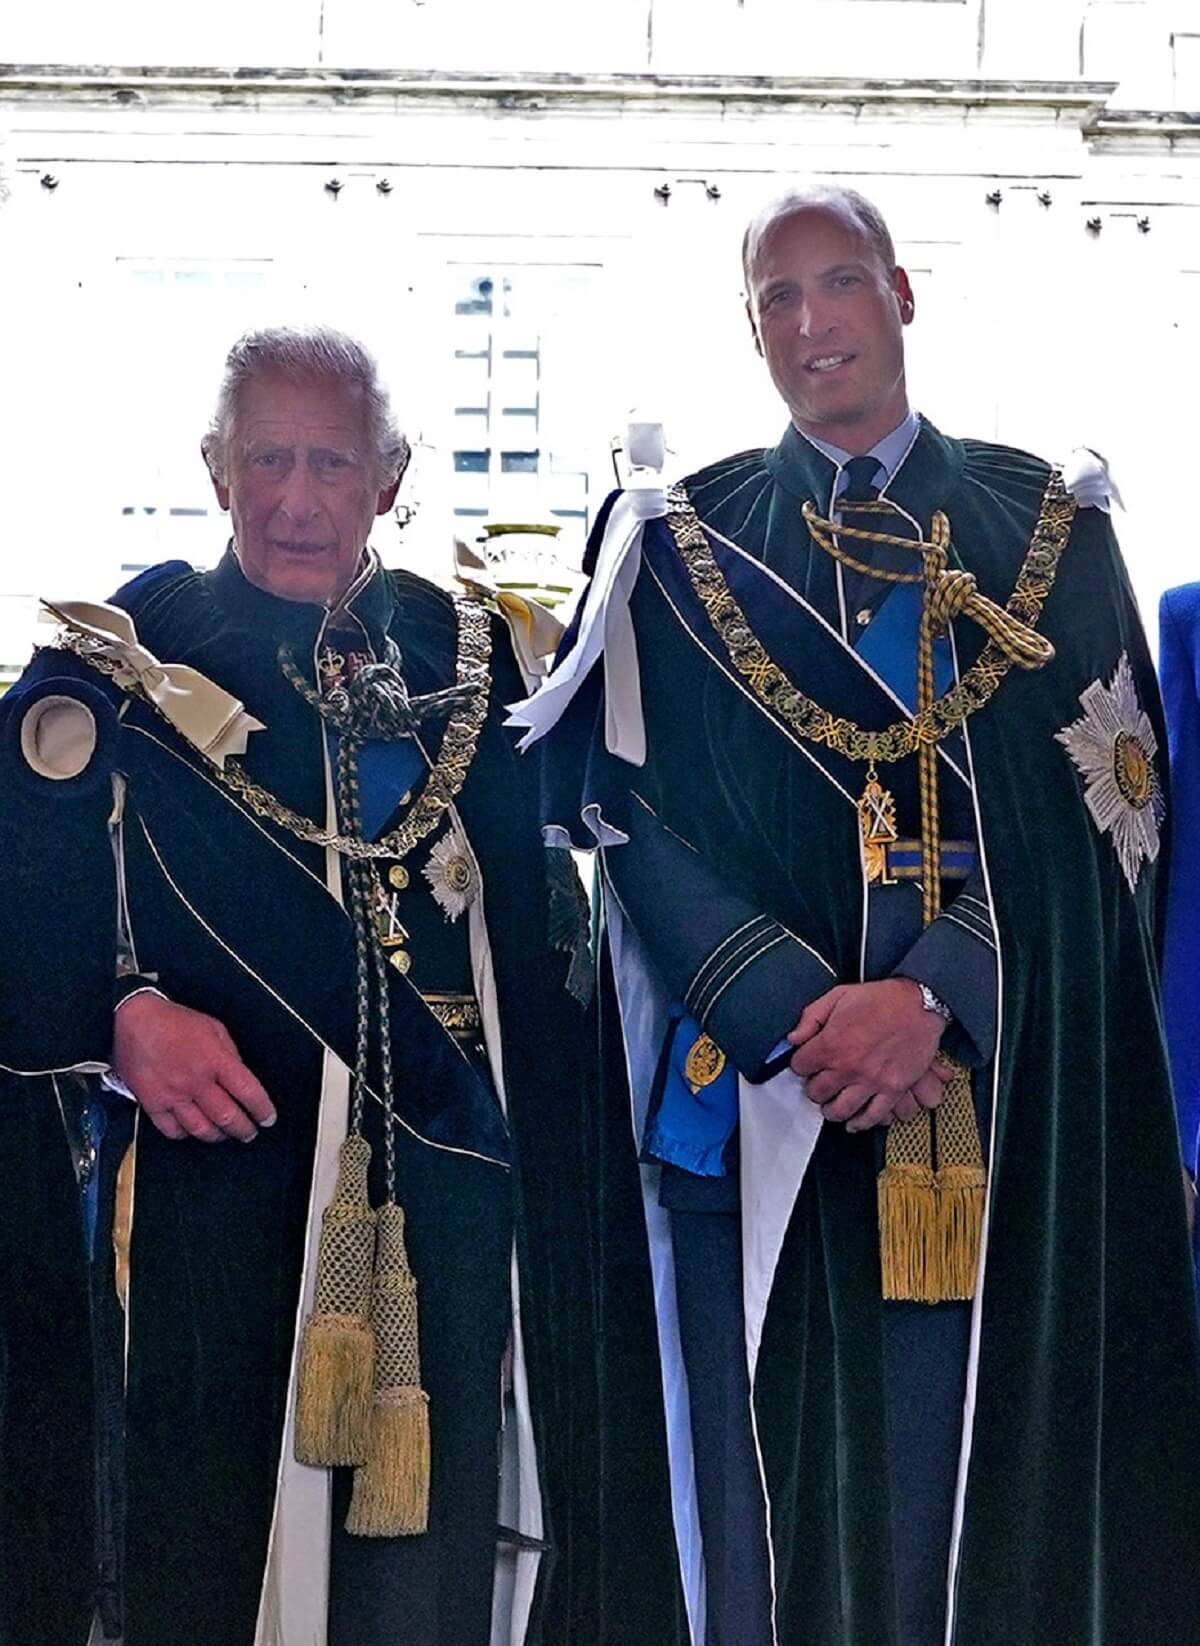 King Charles and Prince William at the Palace of Holyroodhouse after a National Service of Thanksgiving and Dedication to the coronation of the king